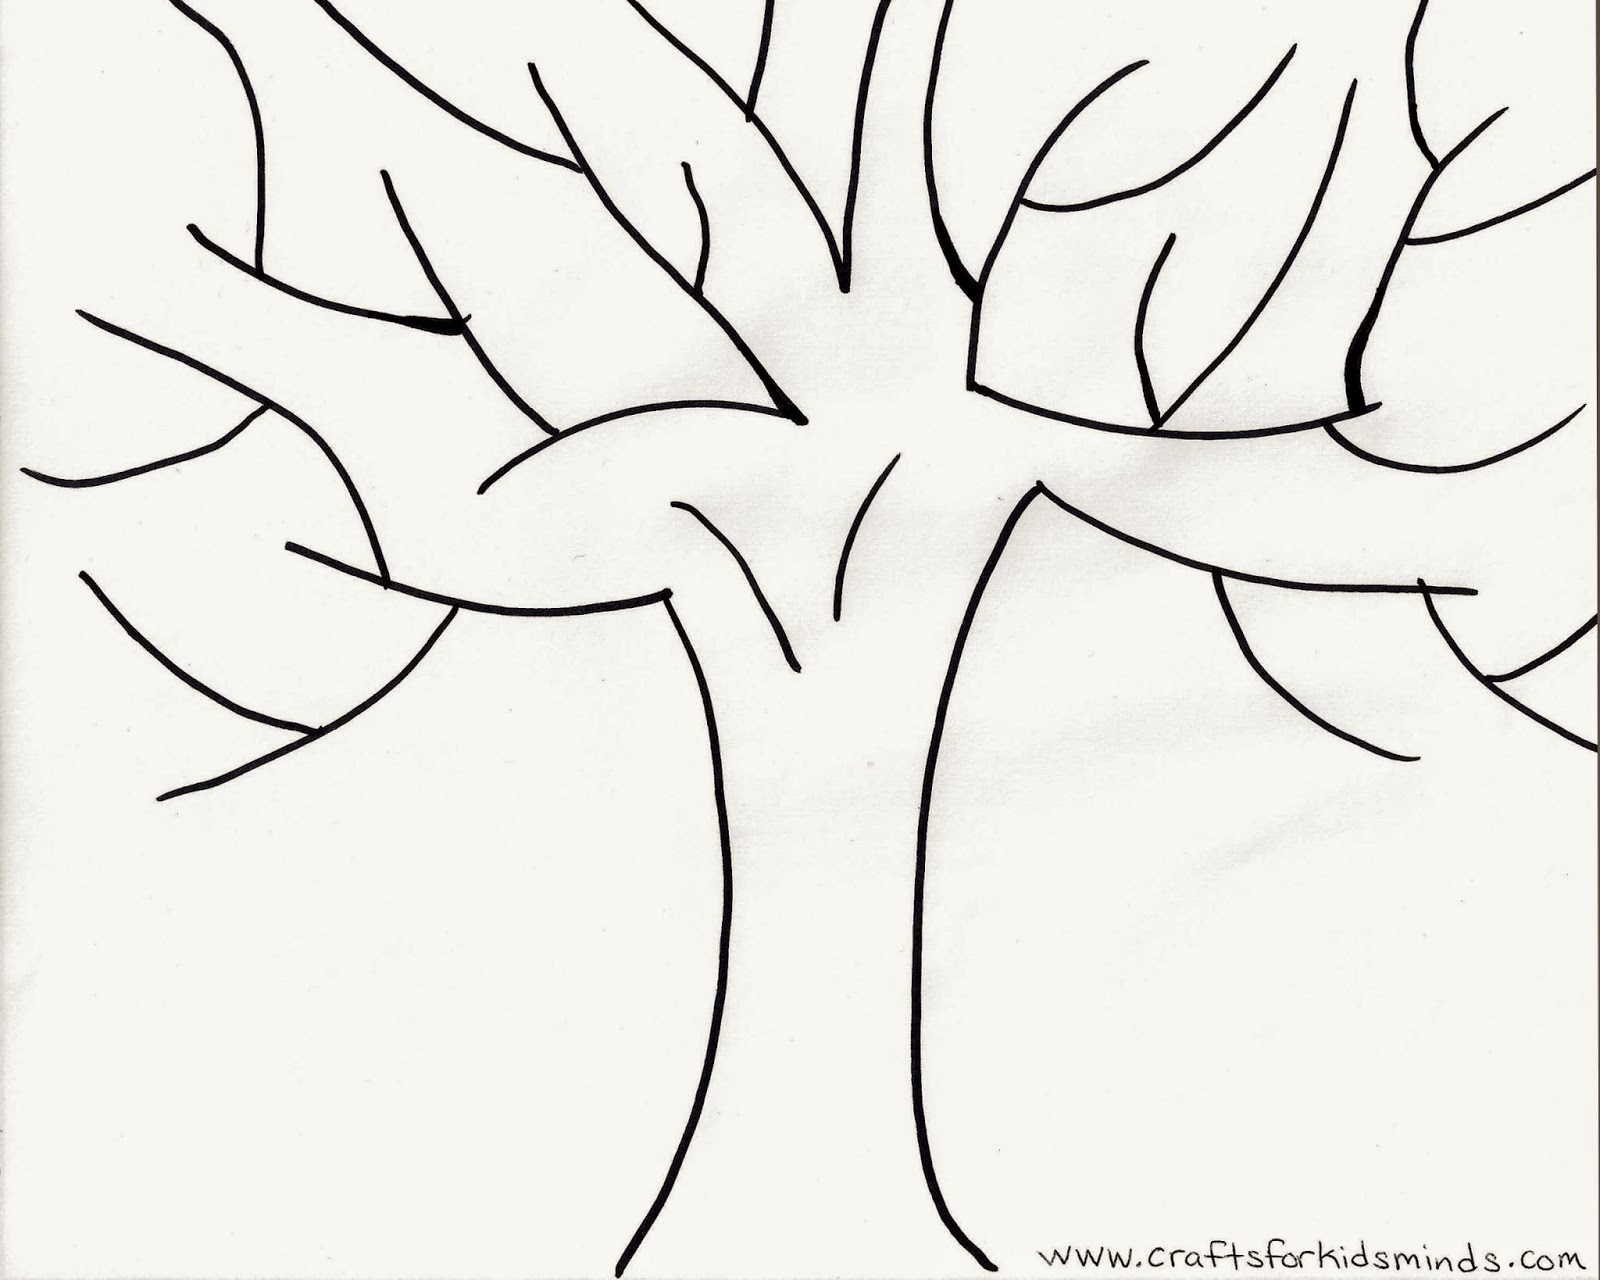 Crafts for Kids' Minds: Free Fall Tree Printable